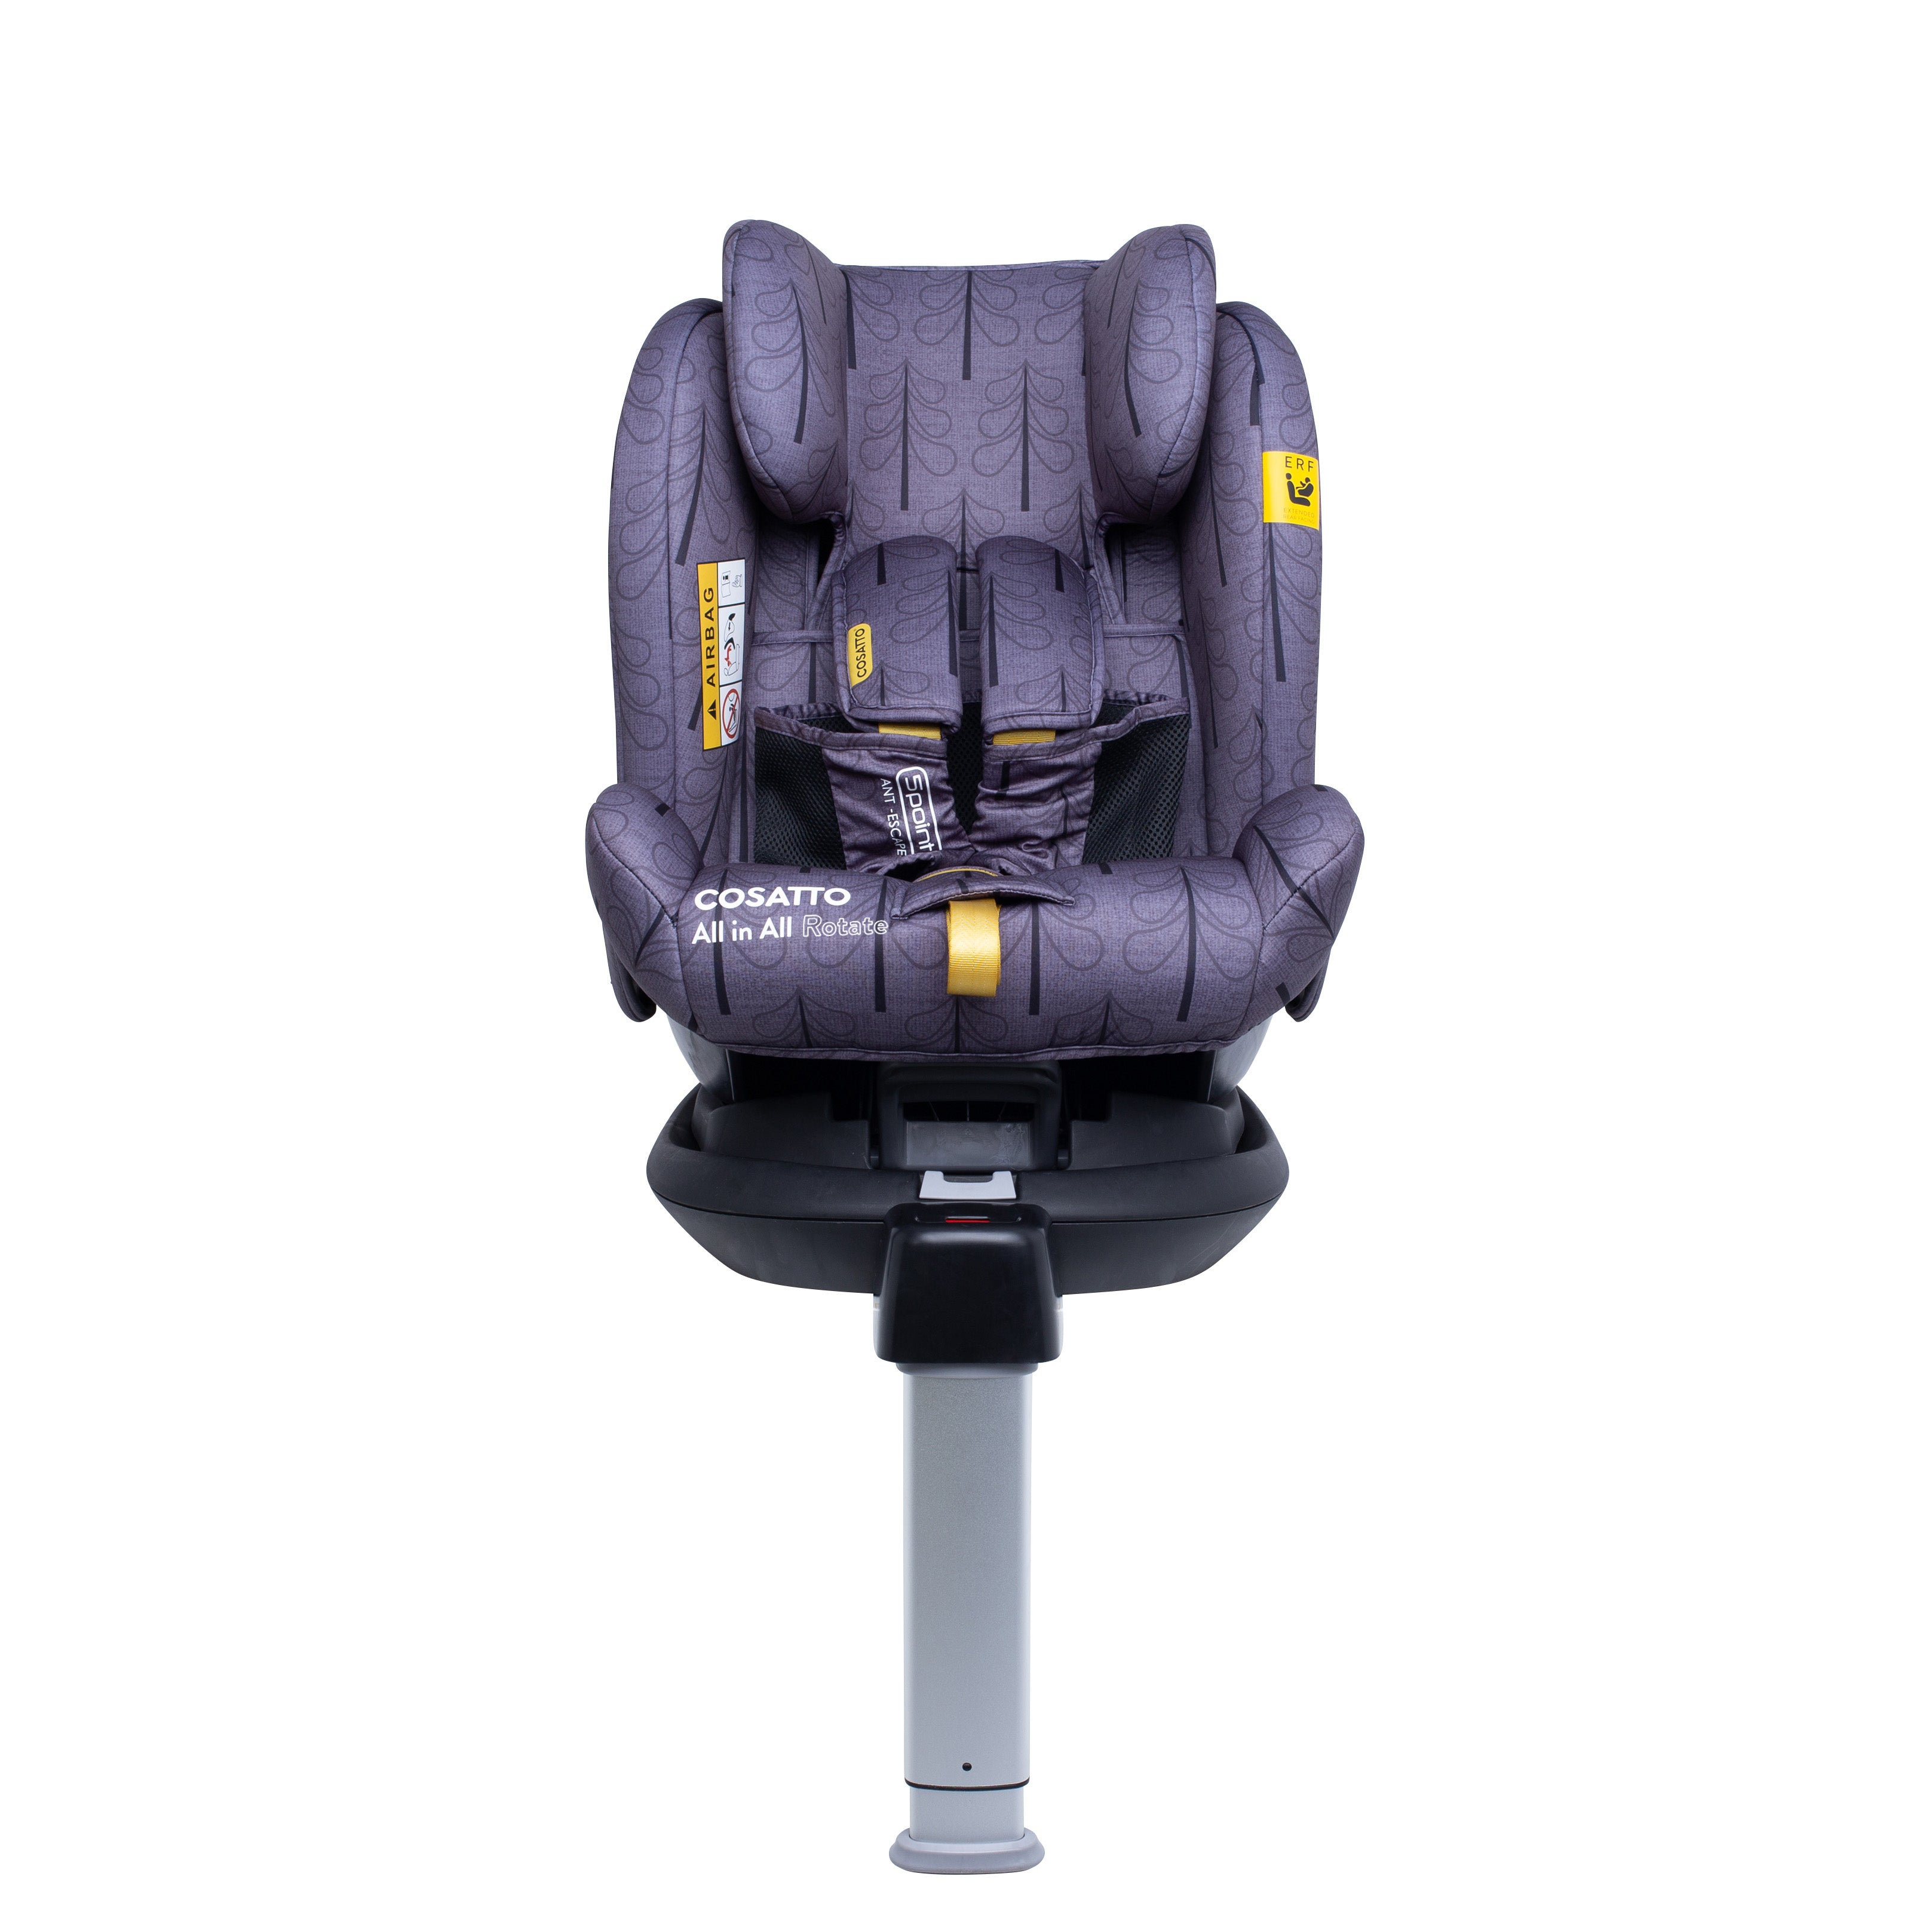 All in All 360 Rotate Car Seat Fika Forest